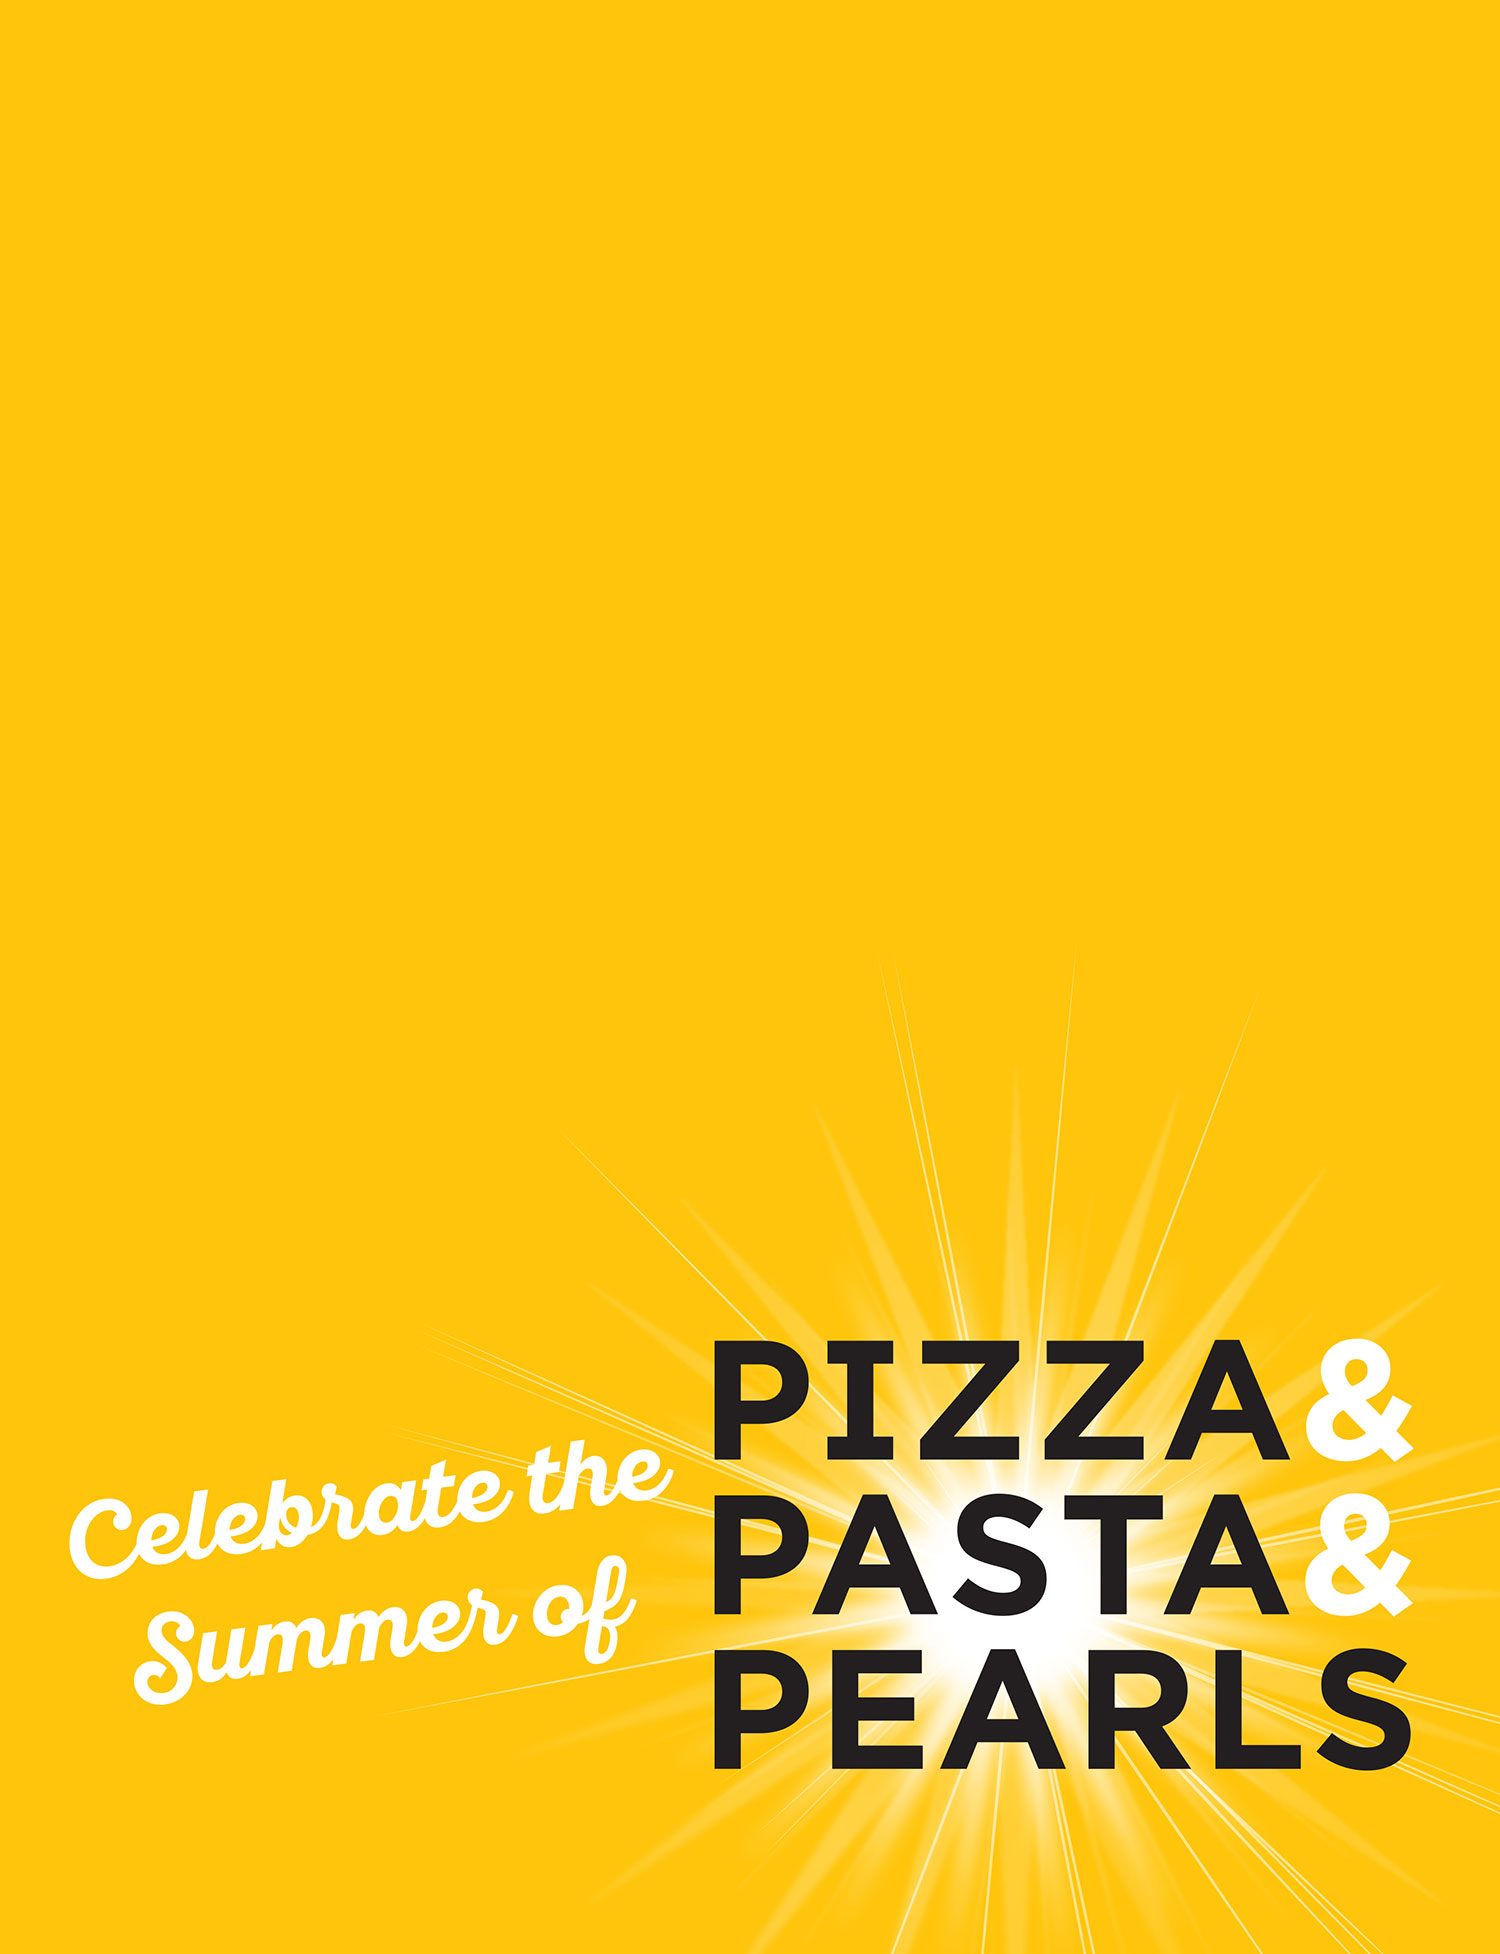 Celebrate the Summer of Pizza & Pasta & Pearls